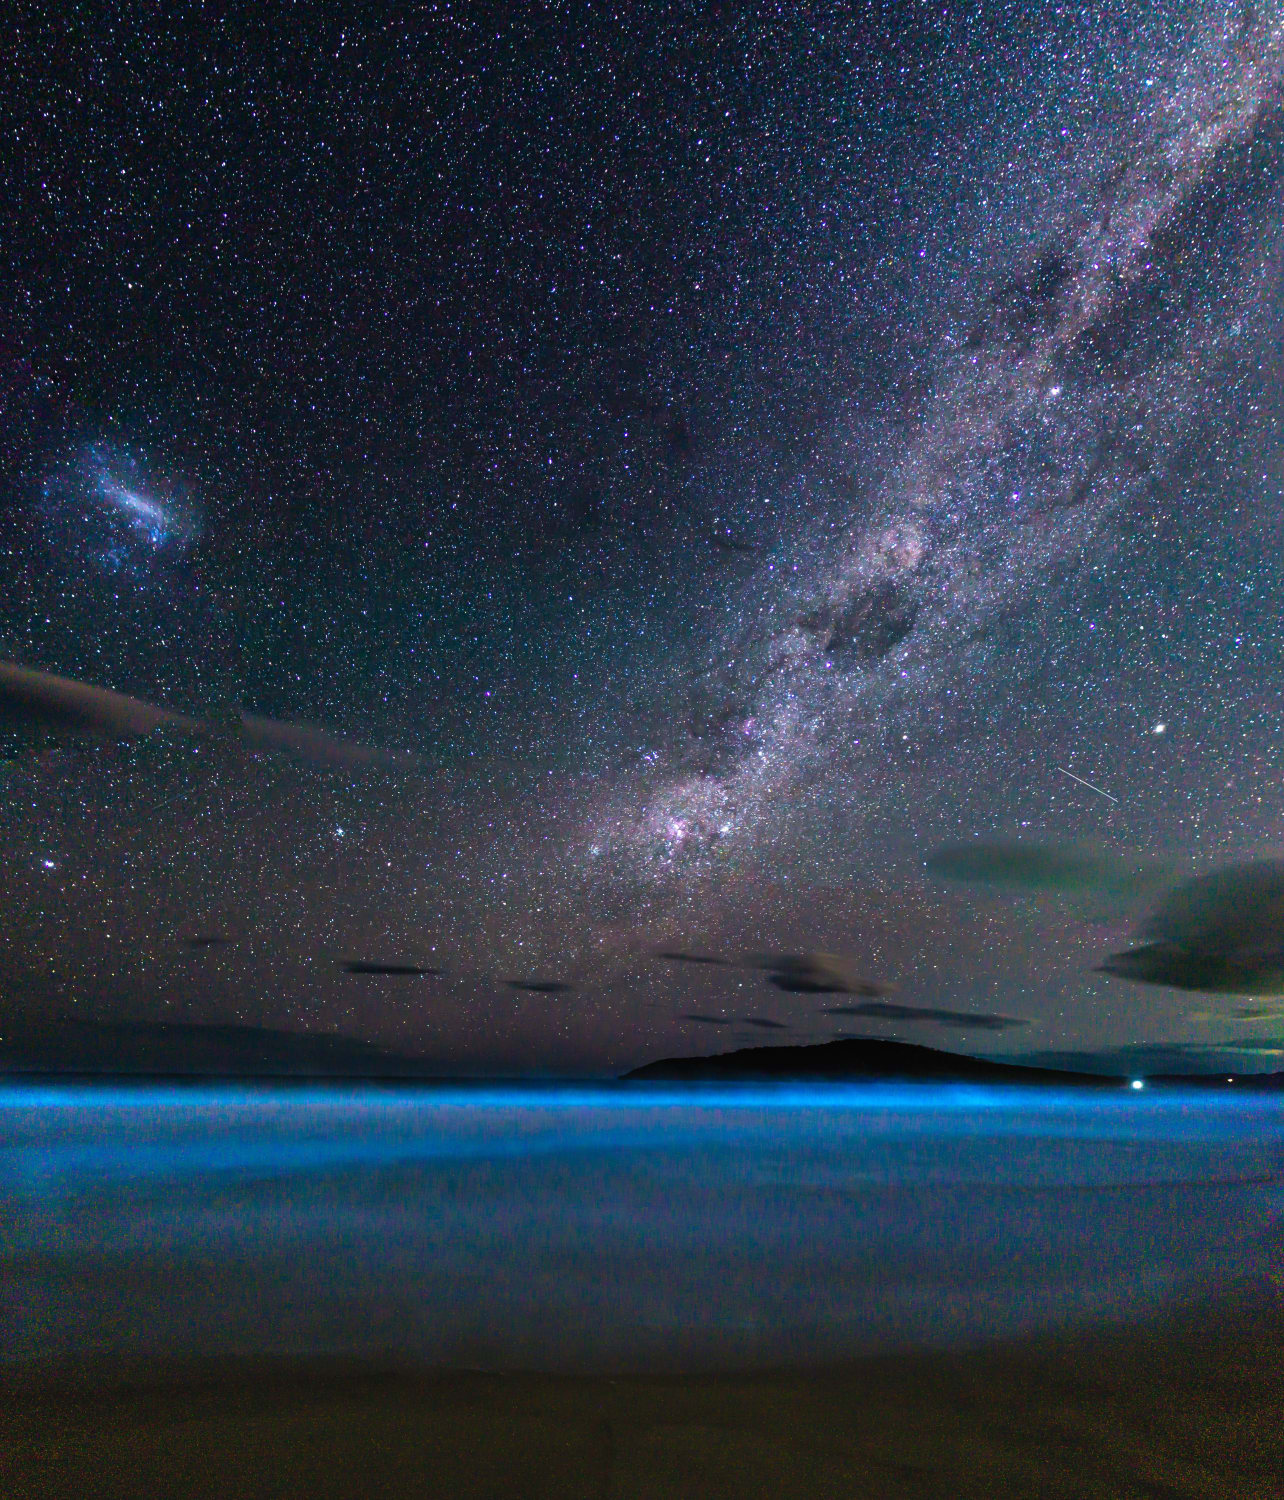 Bioluminescent algae and the milky way rising over South Arm, Tasmania...I believe the ISS is also present just to the right above the clouds!